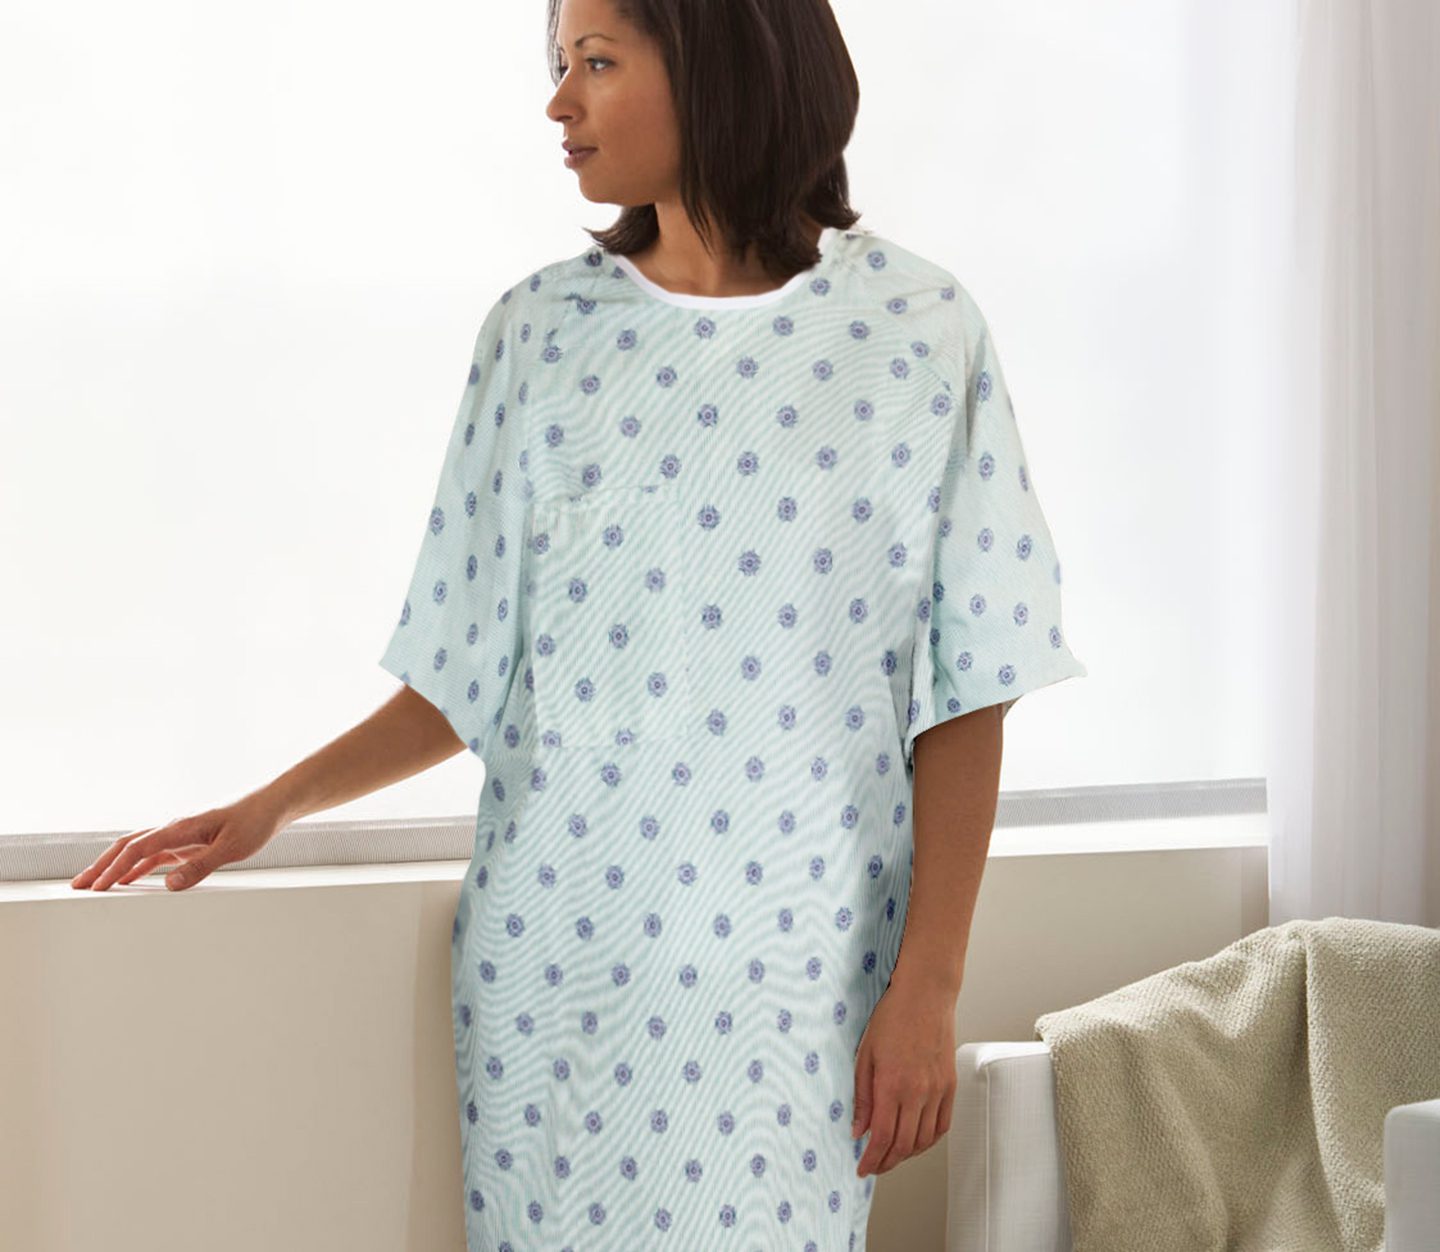 BHmedwear Star Straight Back Closure Hospital Gowns (Dozen) | Hospital gown,  Patient gown, Injury clothes